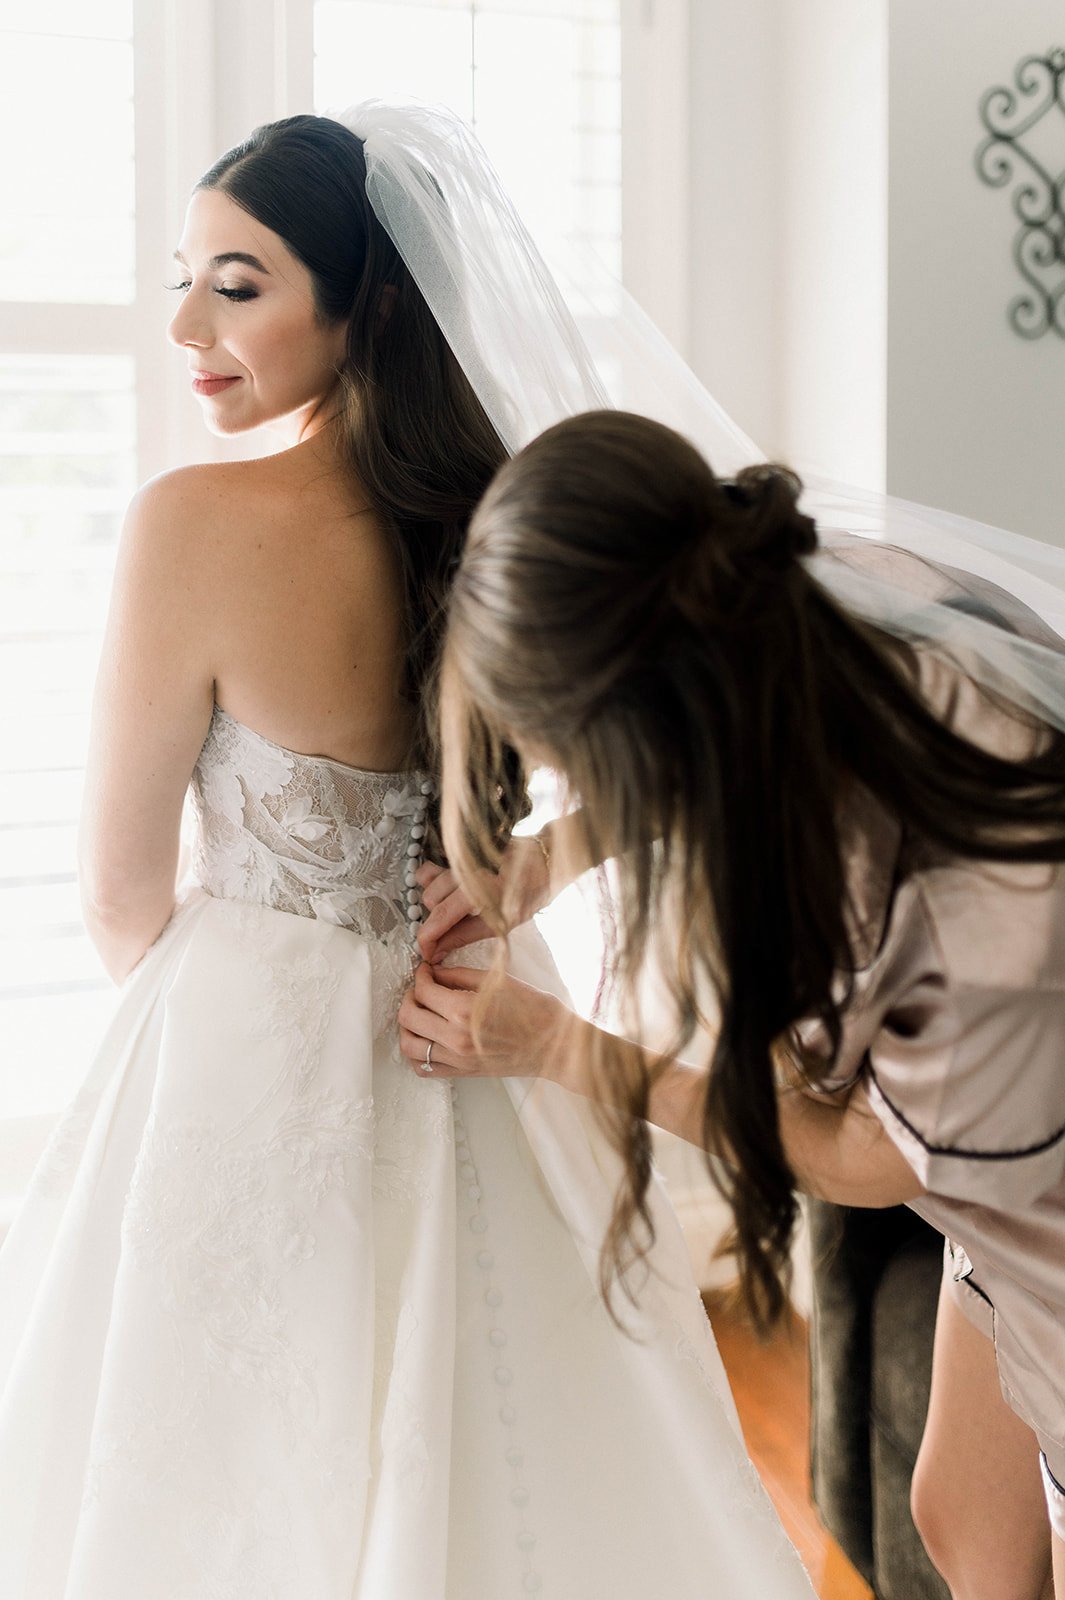 Sister of Bride meticulously fastens buttons on brides sexy wedding dress 